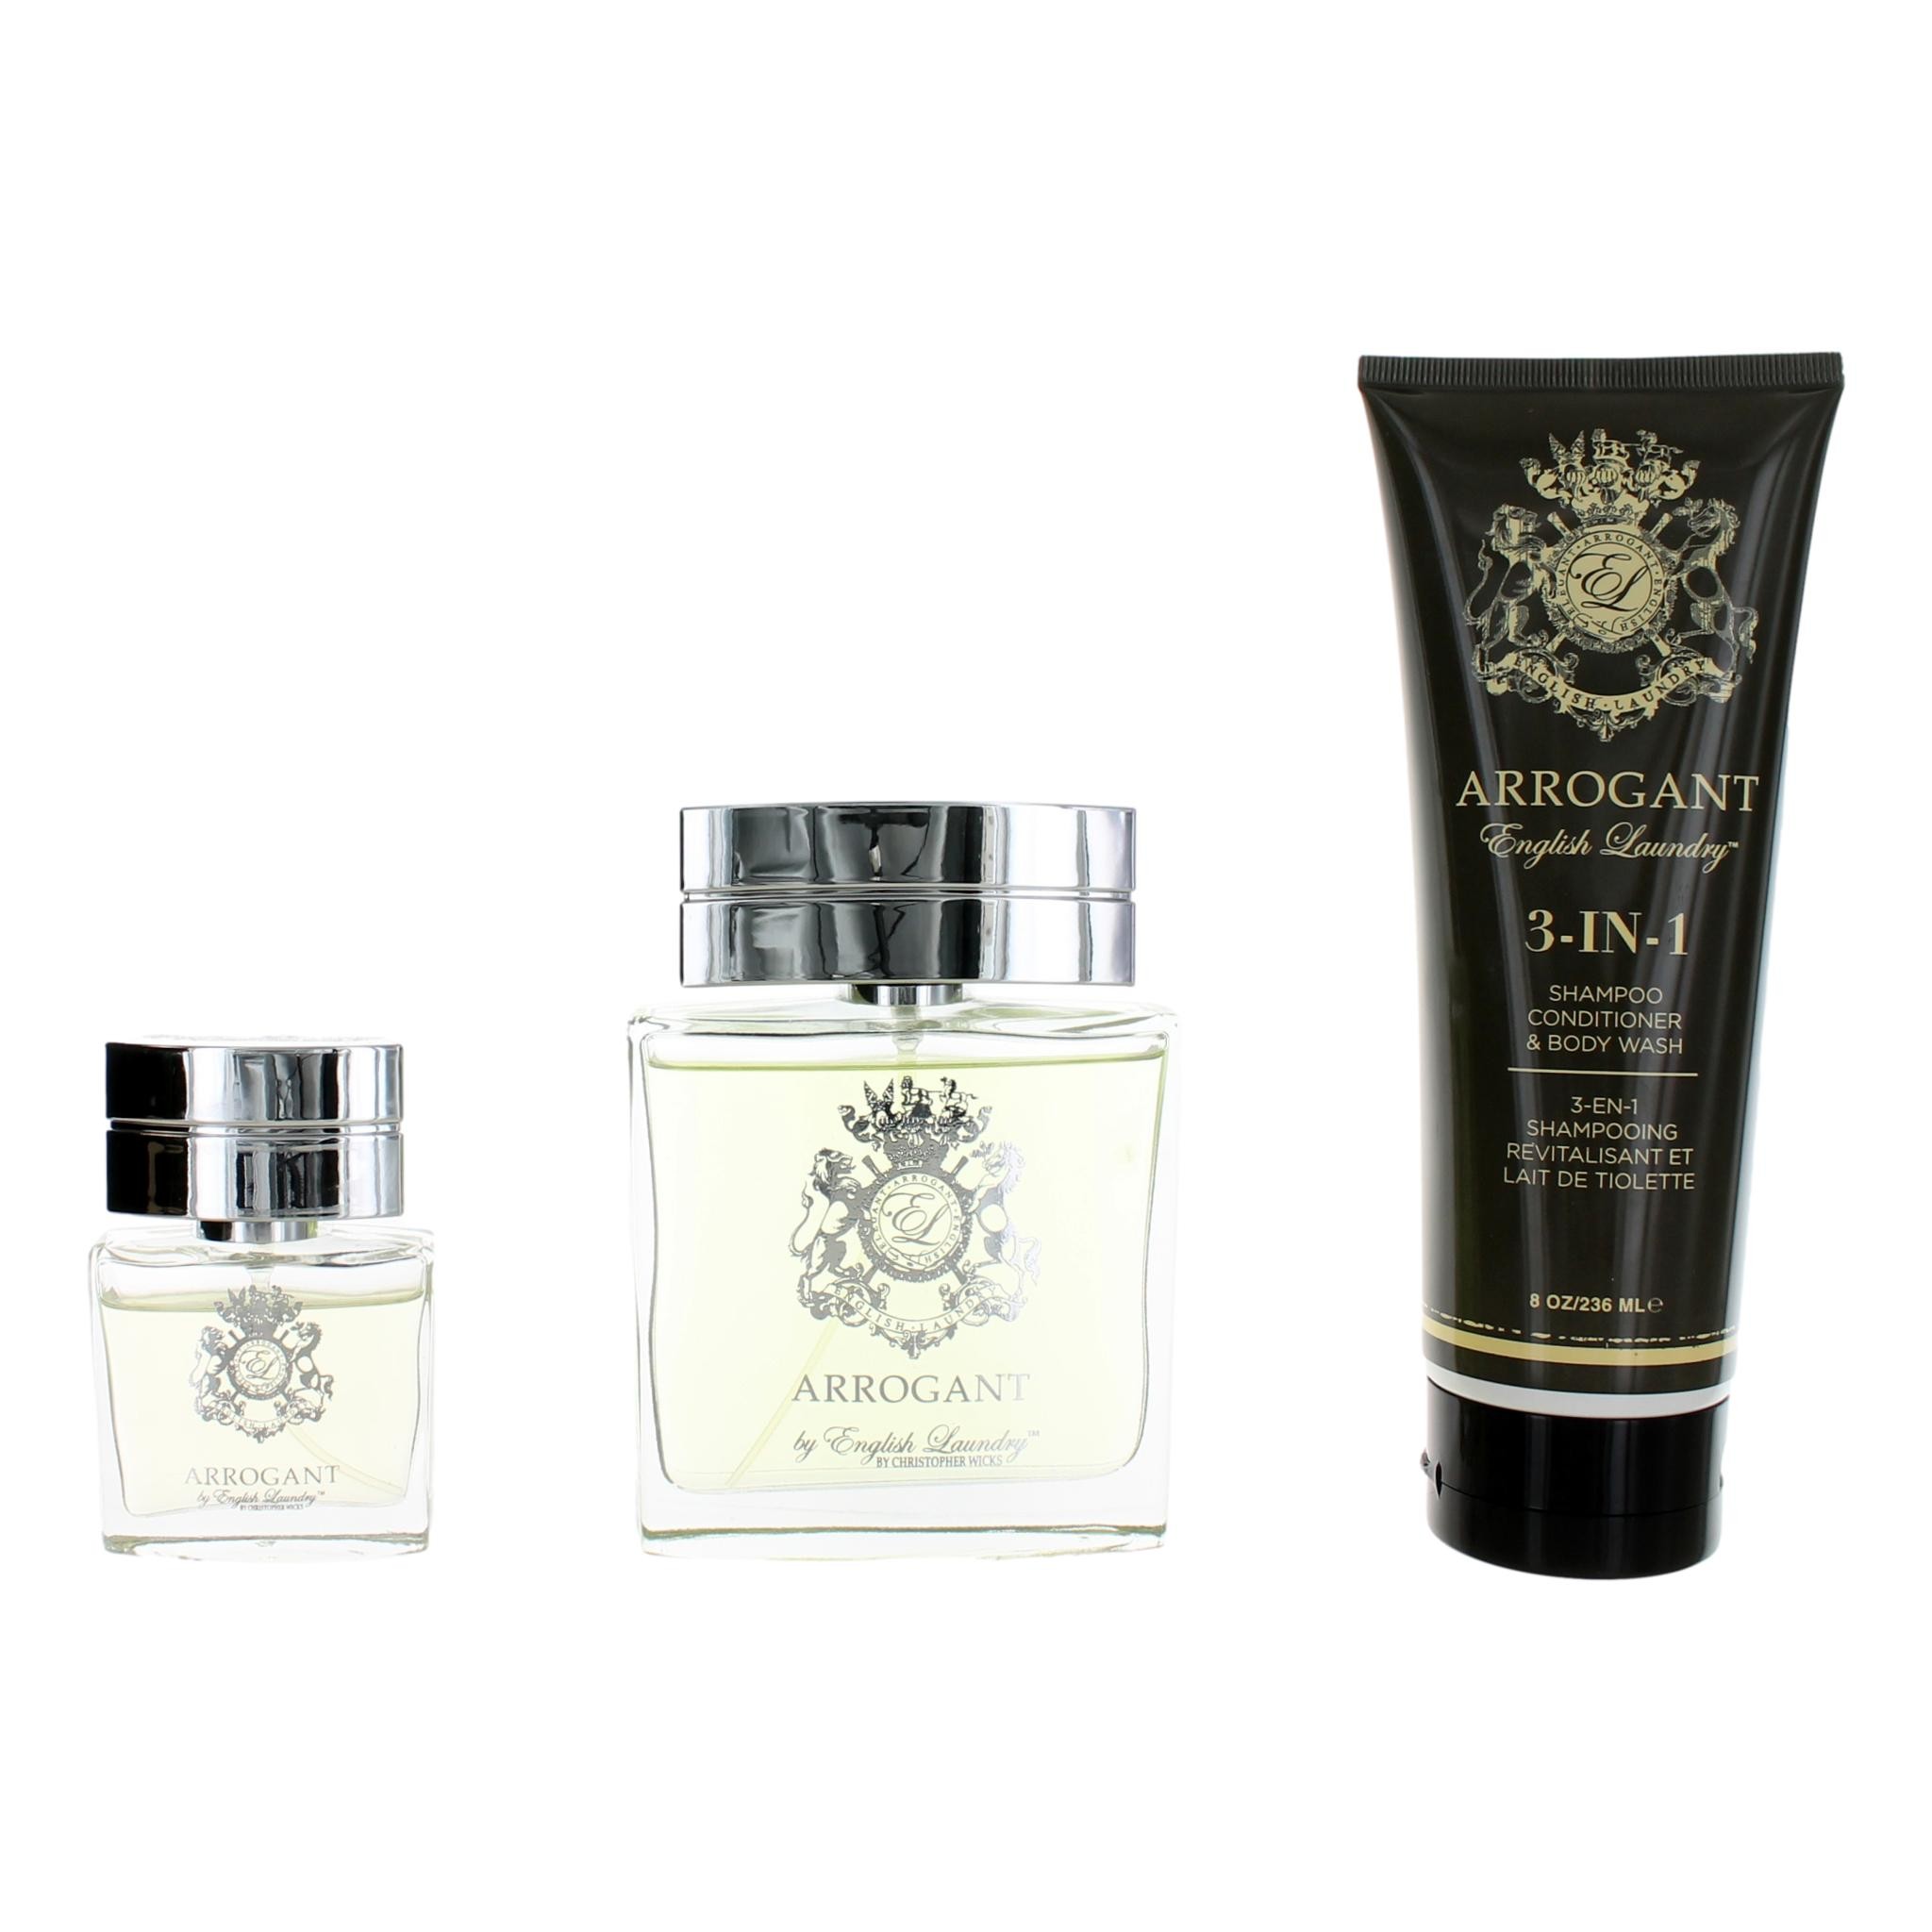 Arrogant by English Laundry 3 Piece Gift Set for Men with 3.4 oz.